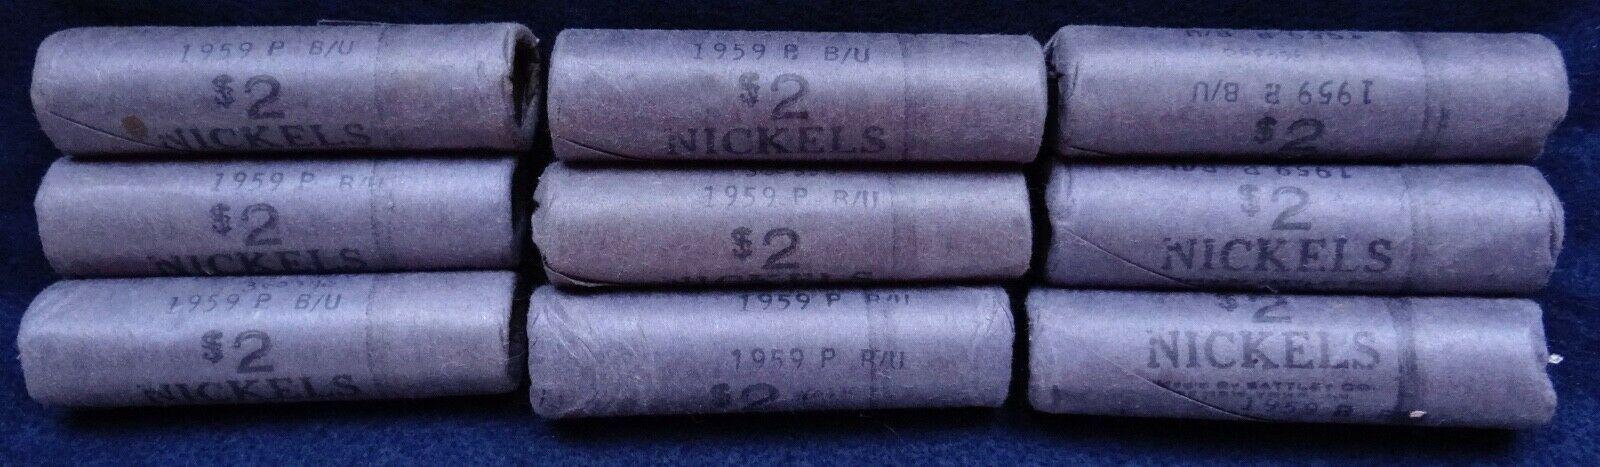 1959-P BU Unopened Nickel Roll Old Wrapper (9 rolls, sold individually)